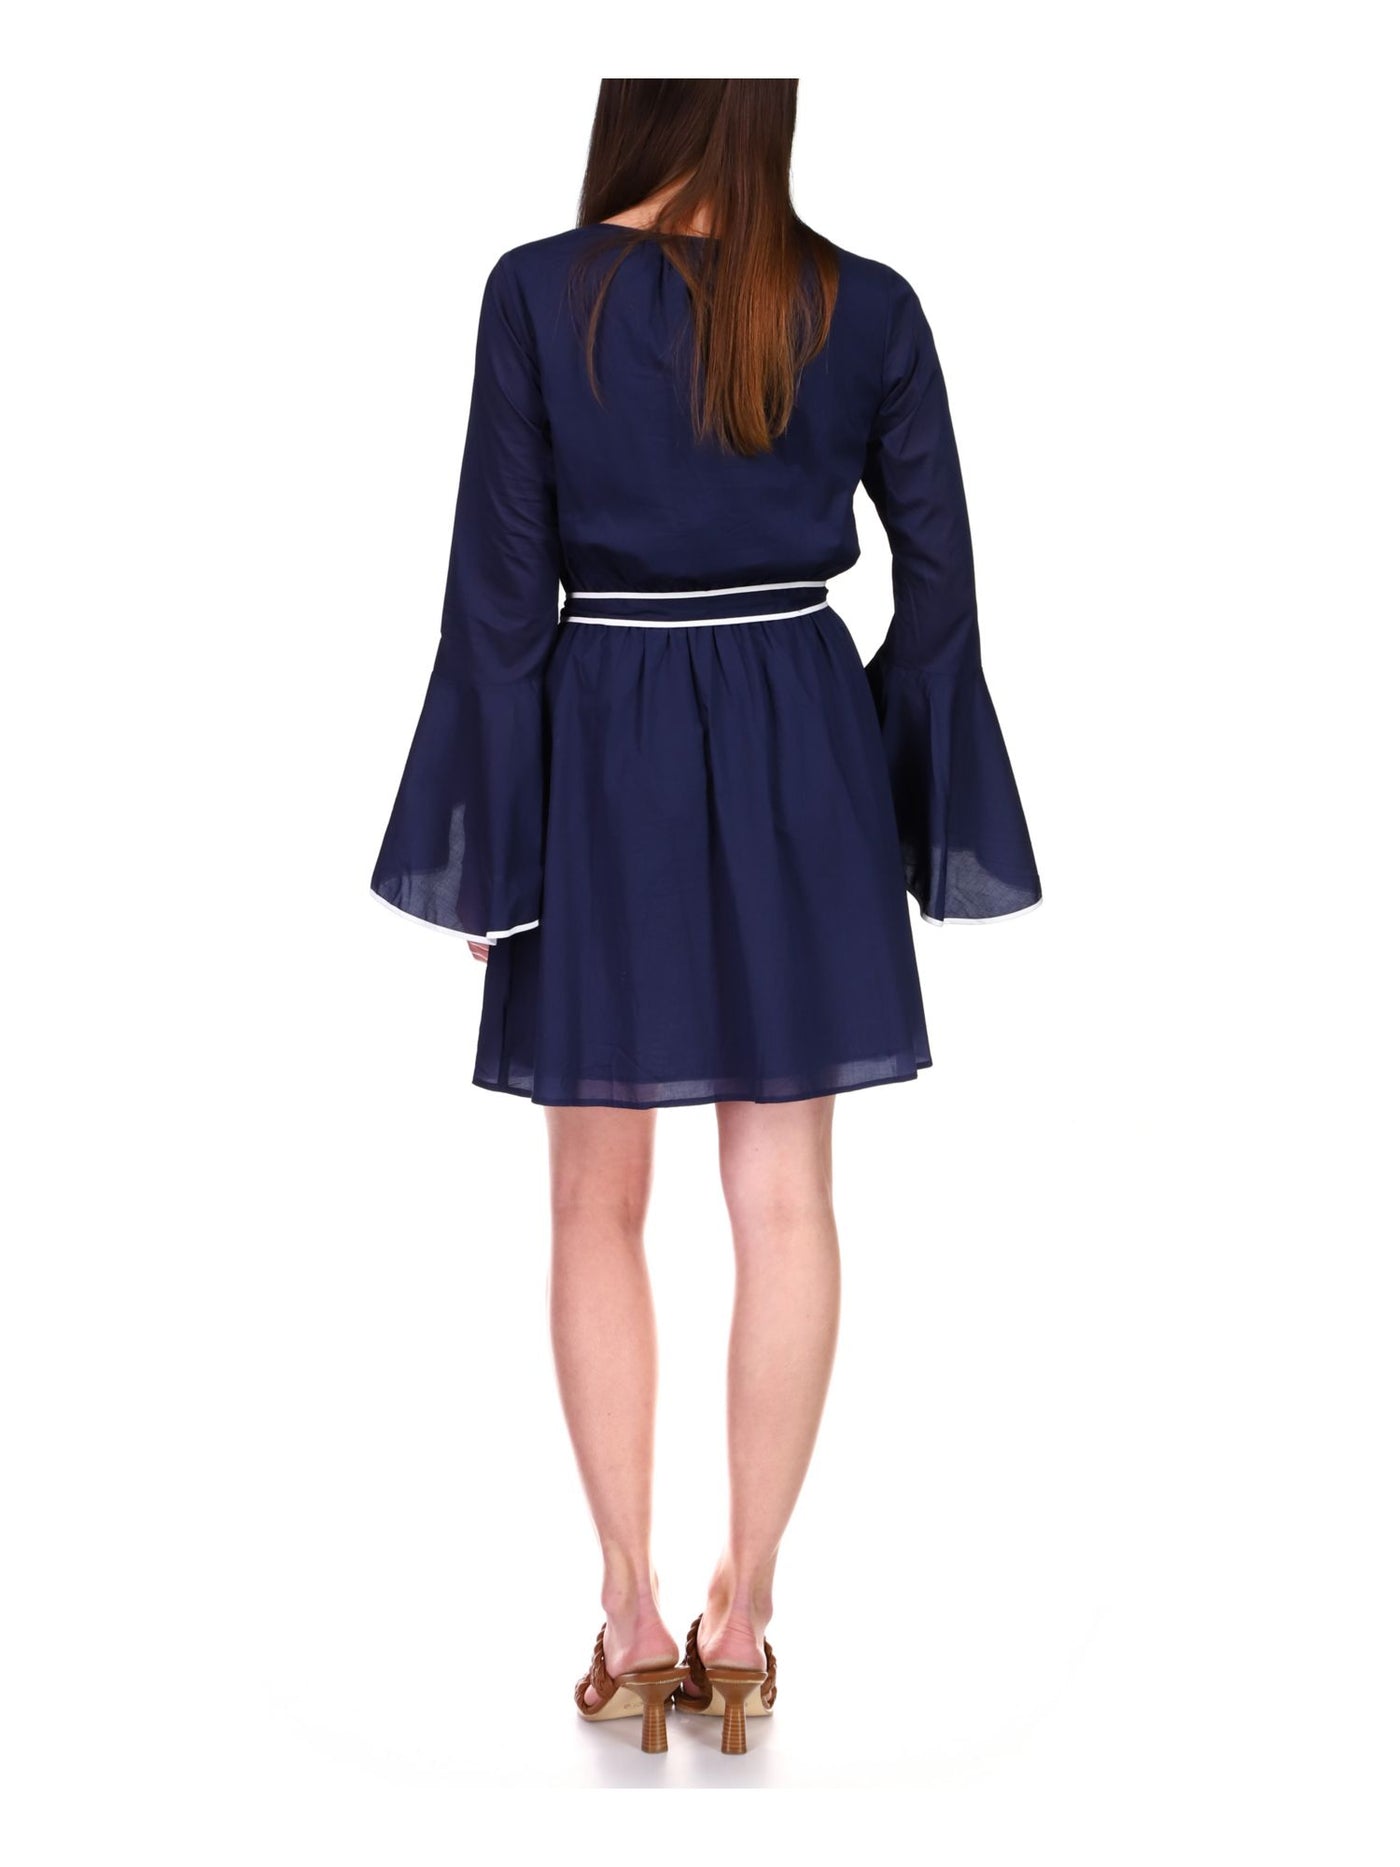 MICHAEL MICHAEL KORS Womens Navy Belted Bell Sleeve V Neck Above The Knee Cocktail Fit + Flare Dress Petites P\S